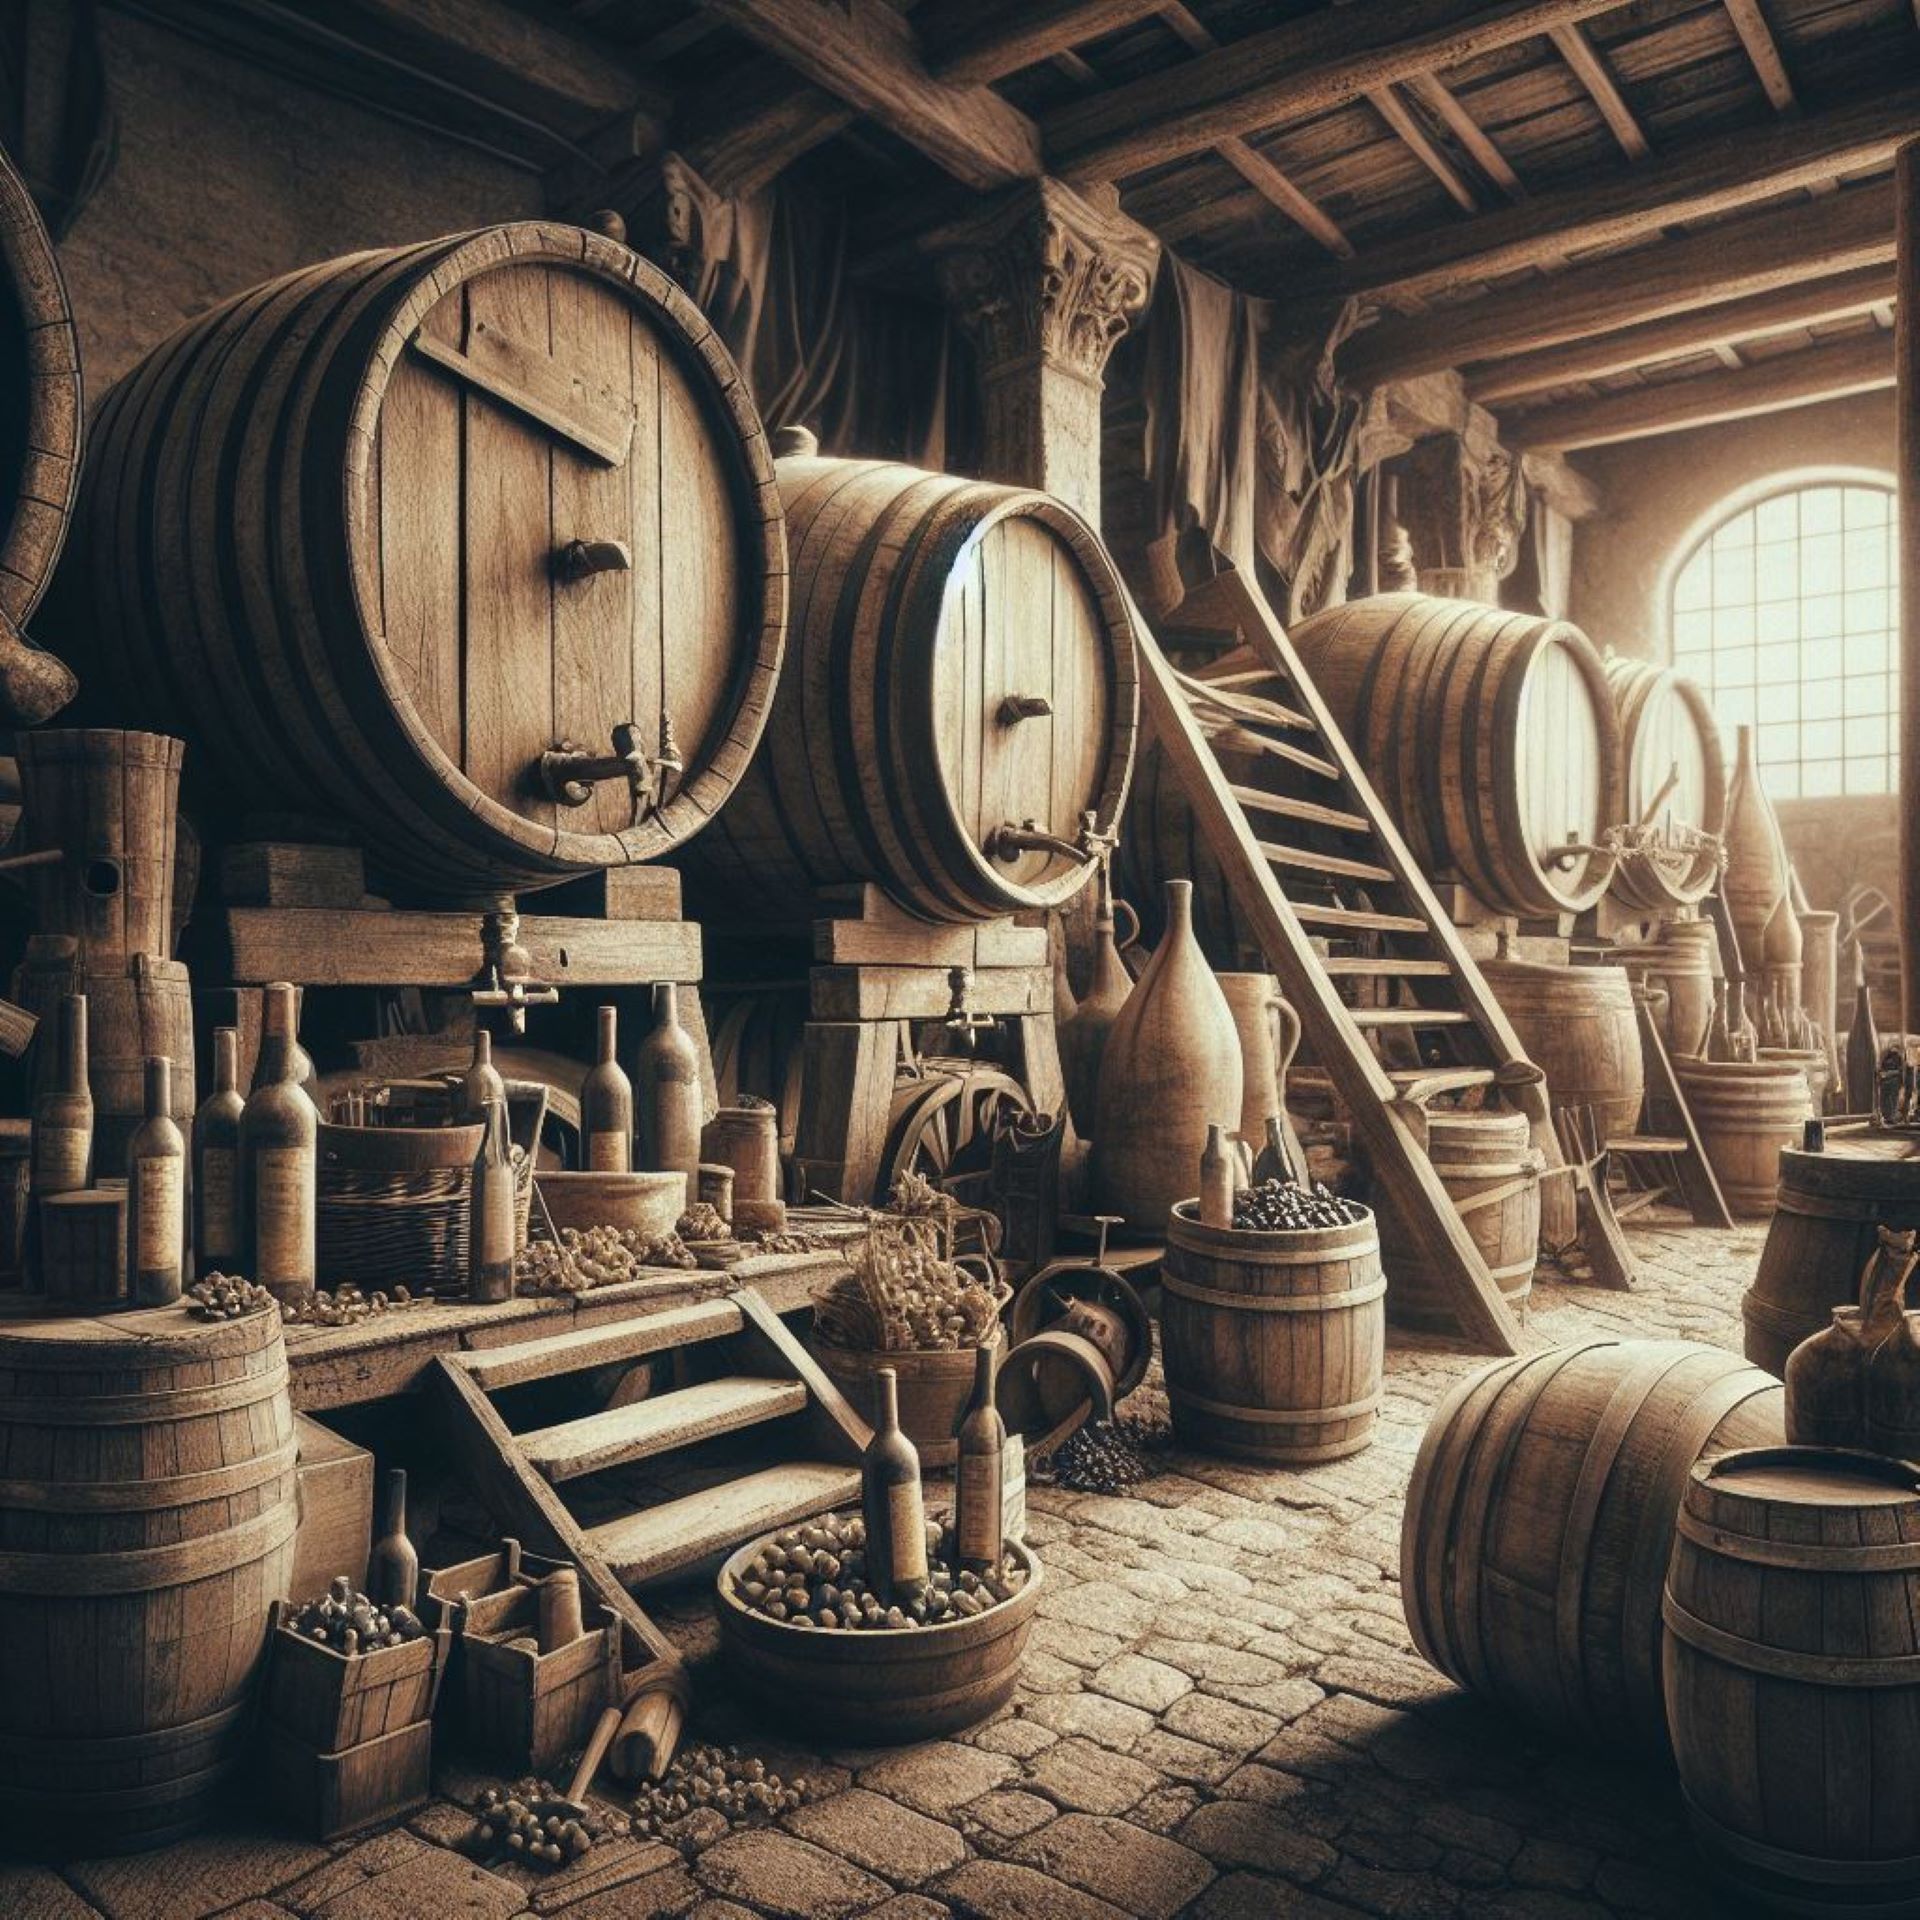 Visualize an old Italian winery with wooden barrels and vintage wine-making tools, capturing the rich history of Italian white wine production